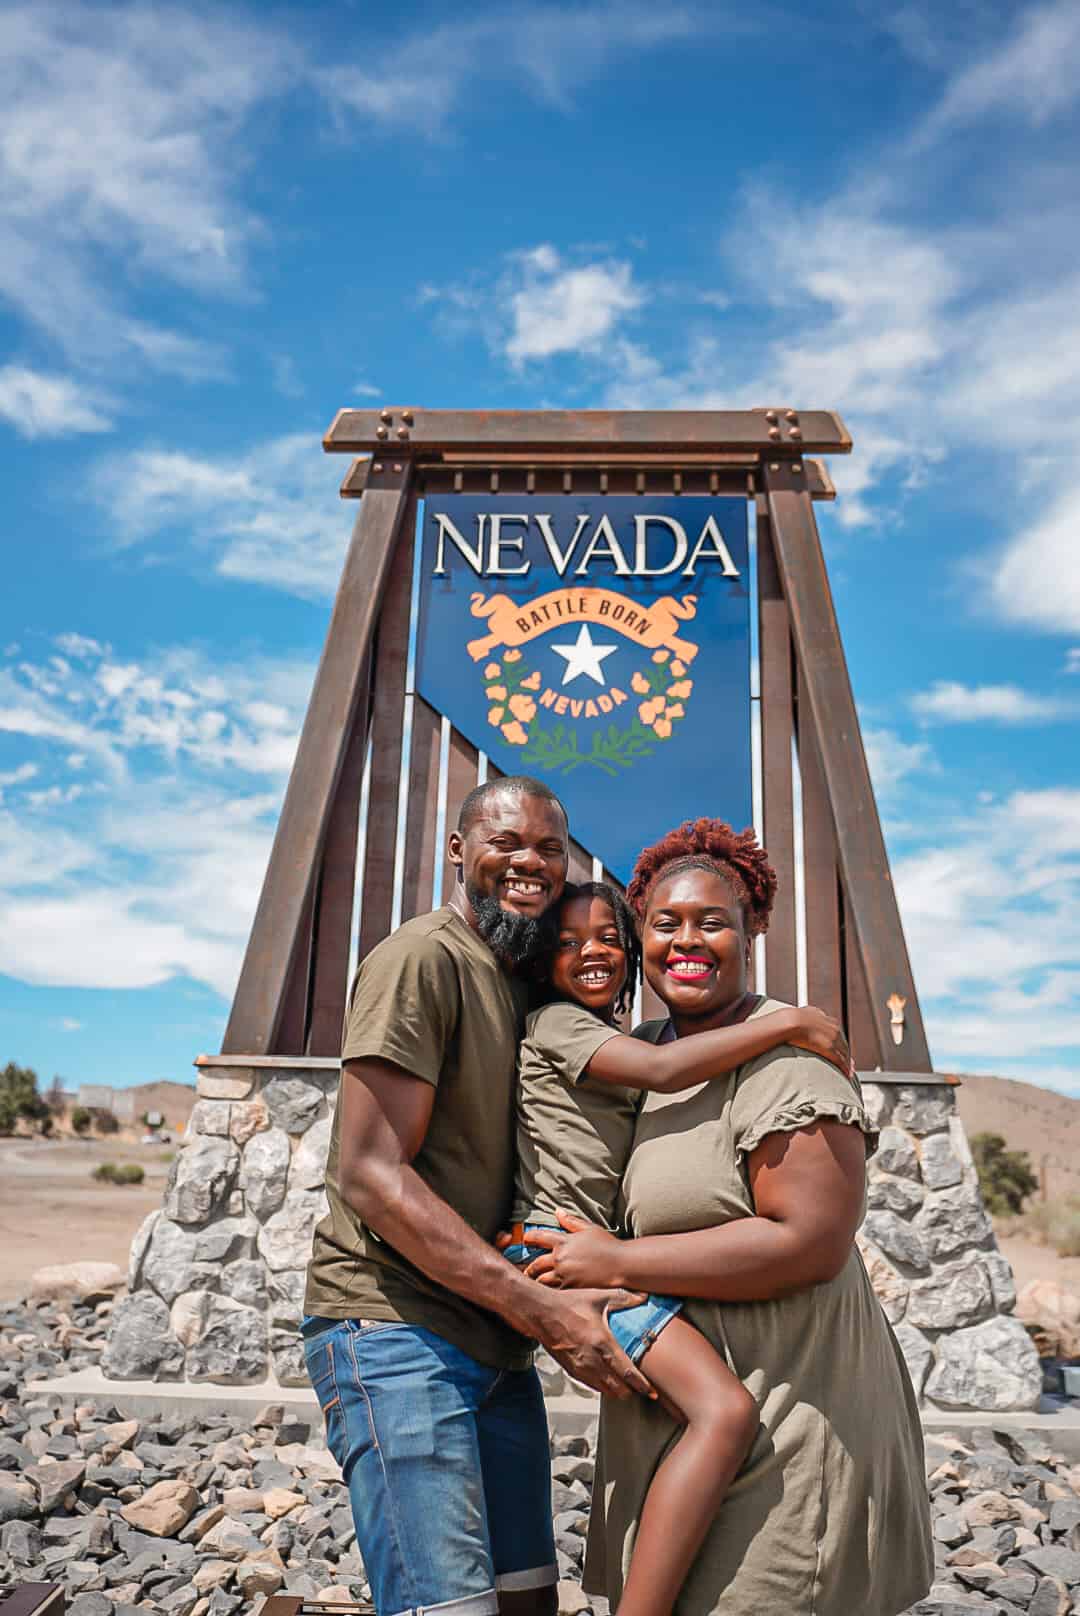 Nevada welcome sign